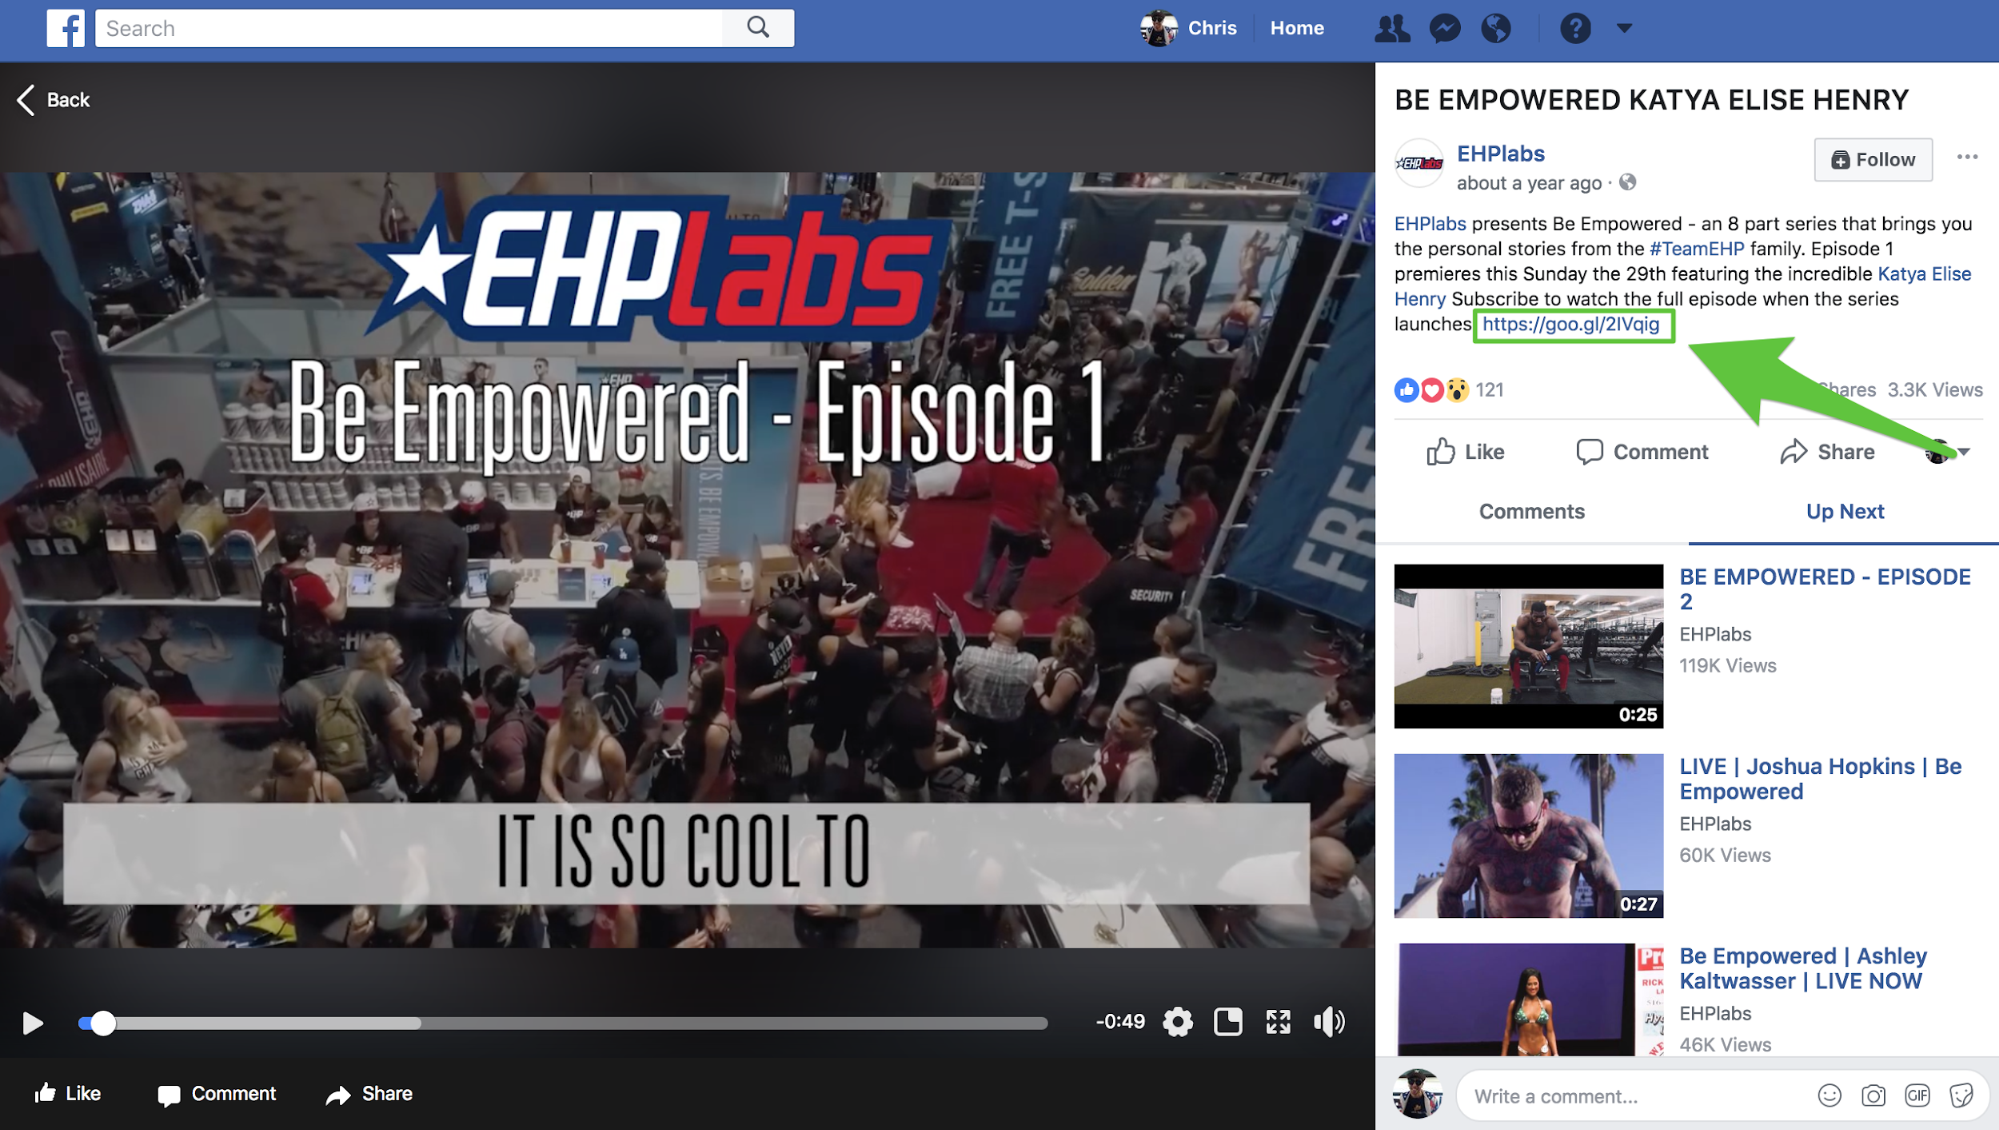 Screenshot showing a Facebook video by EHPlabs